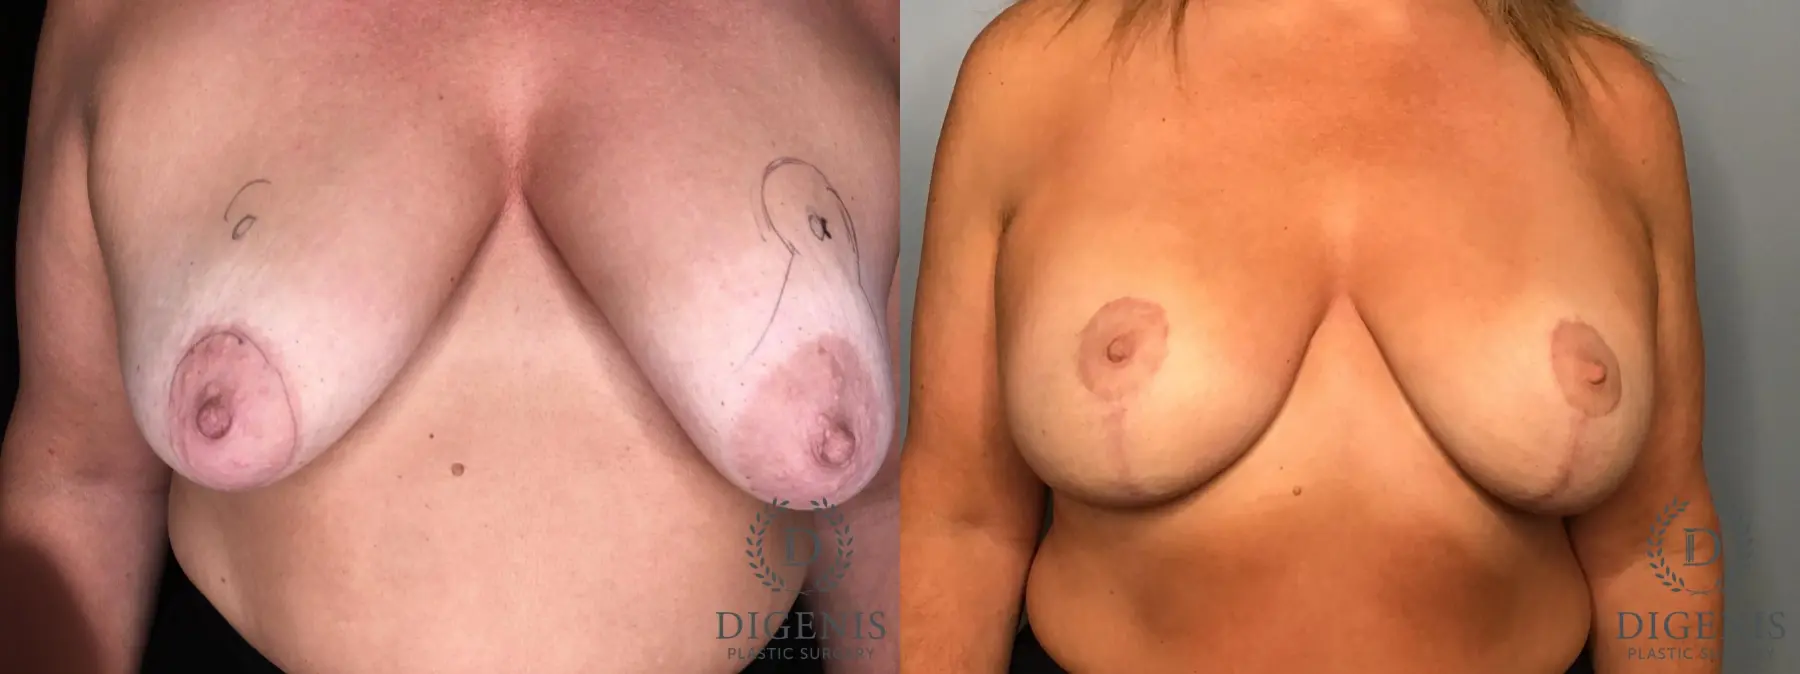 Mastopexy: Patient 2 - Before and After 1